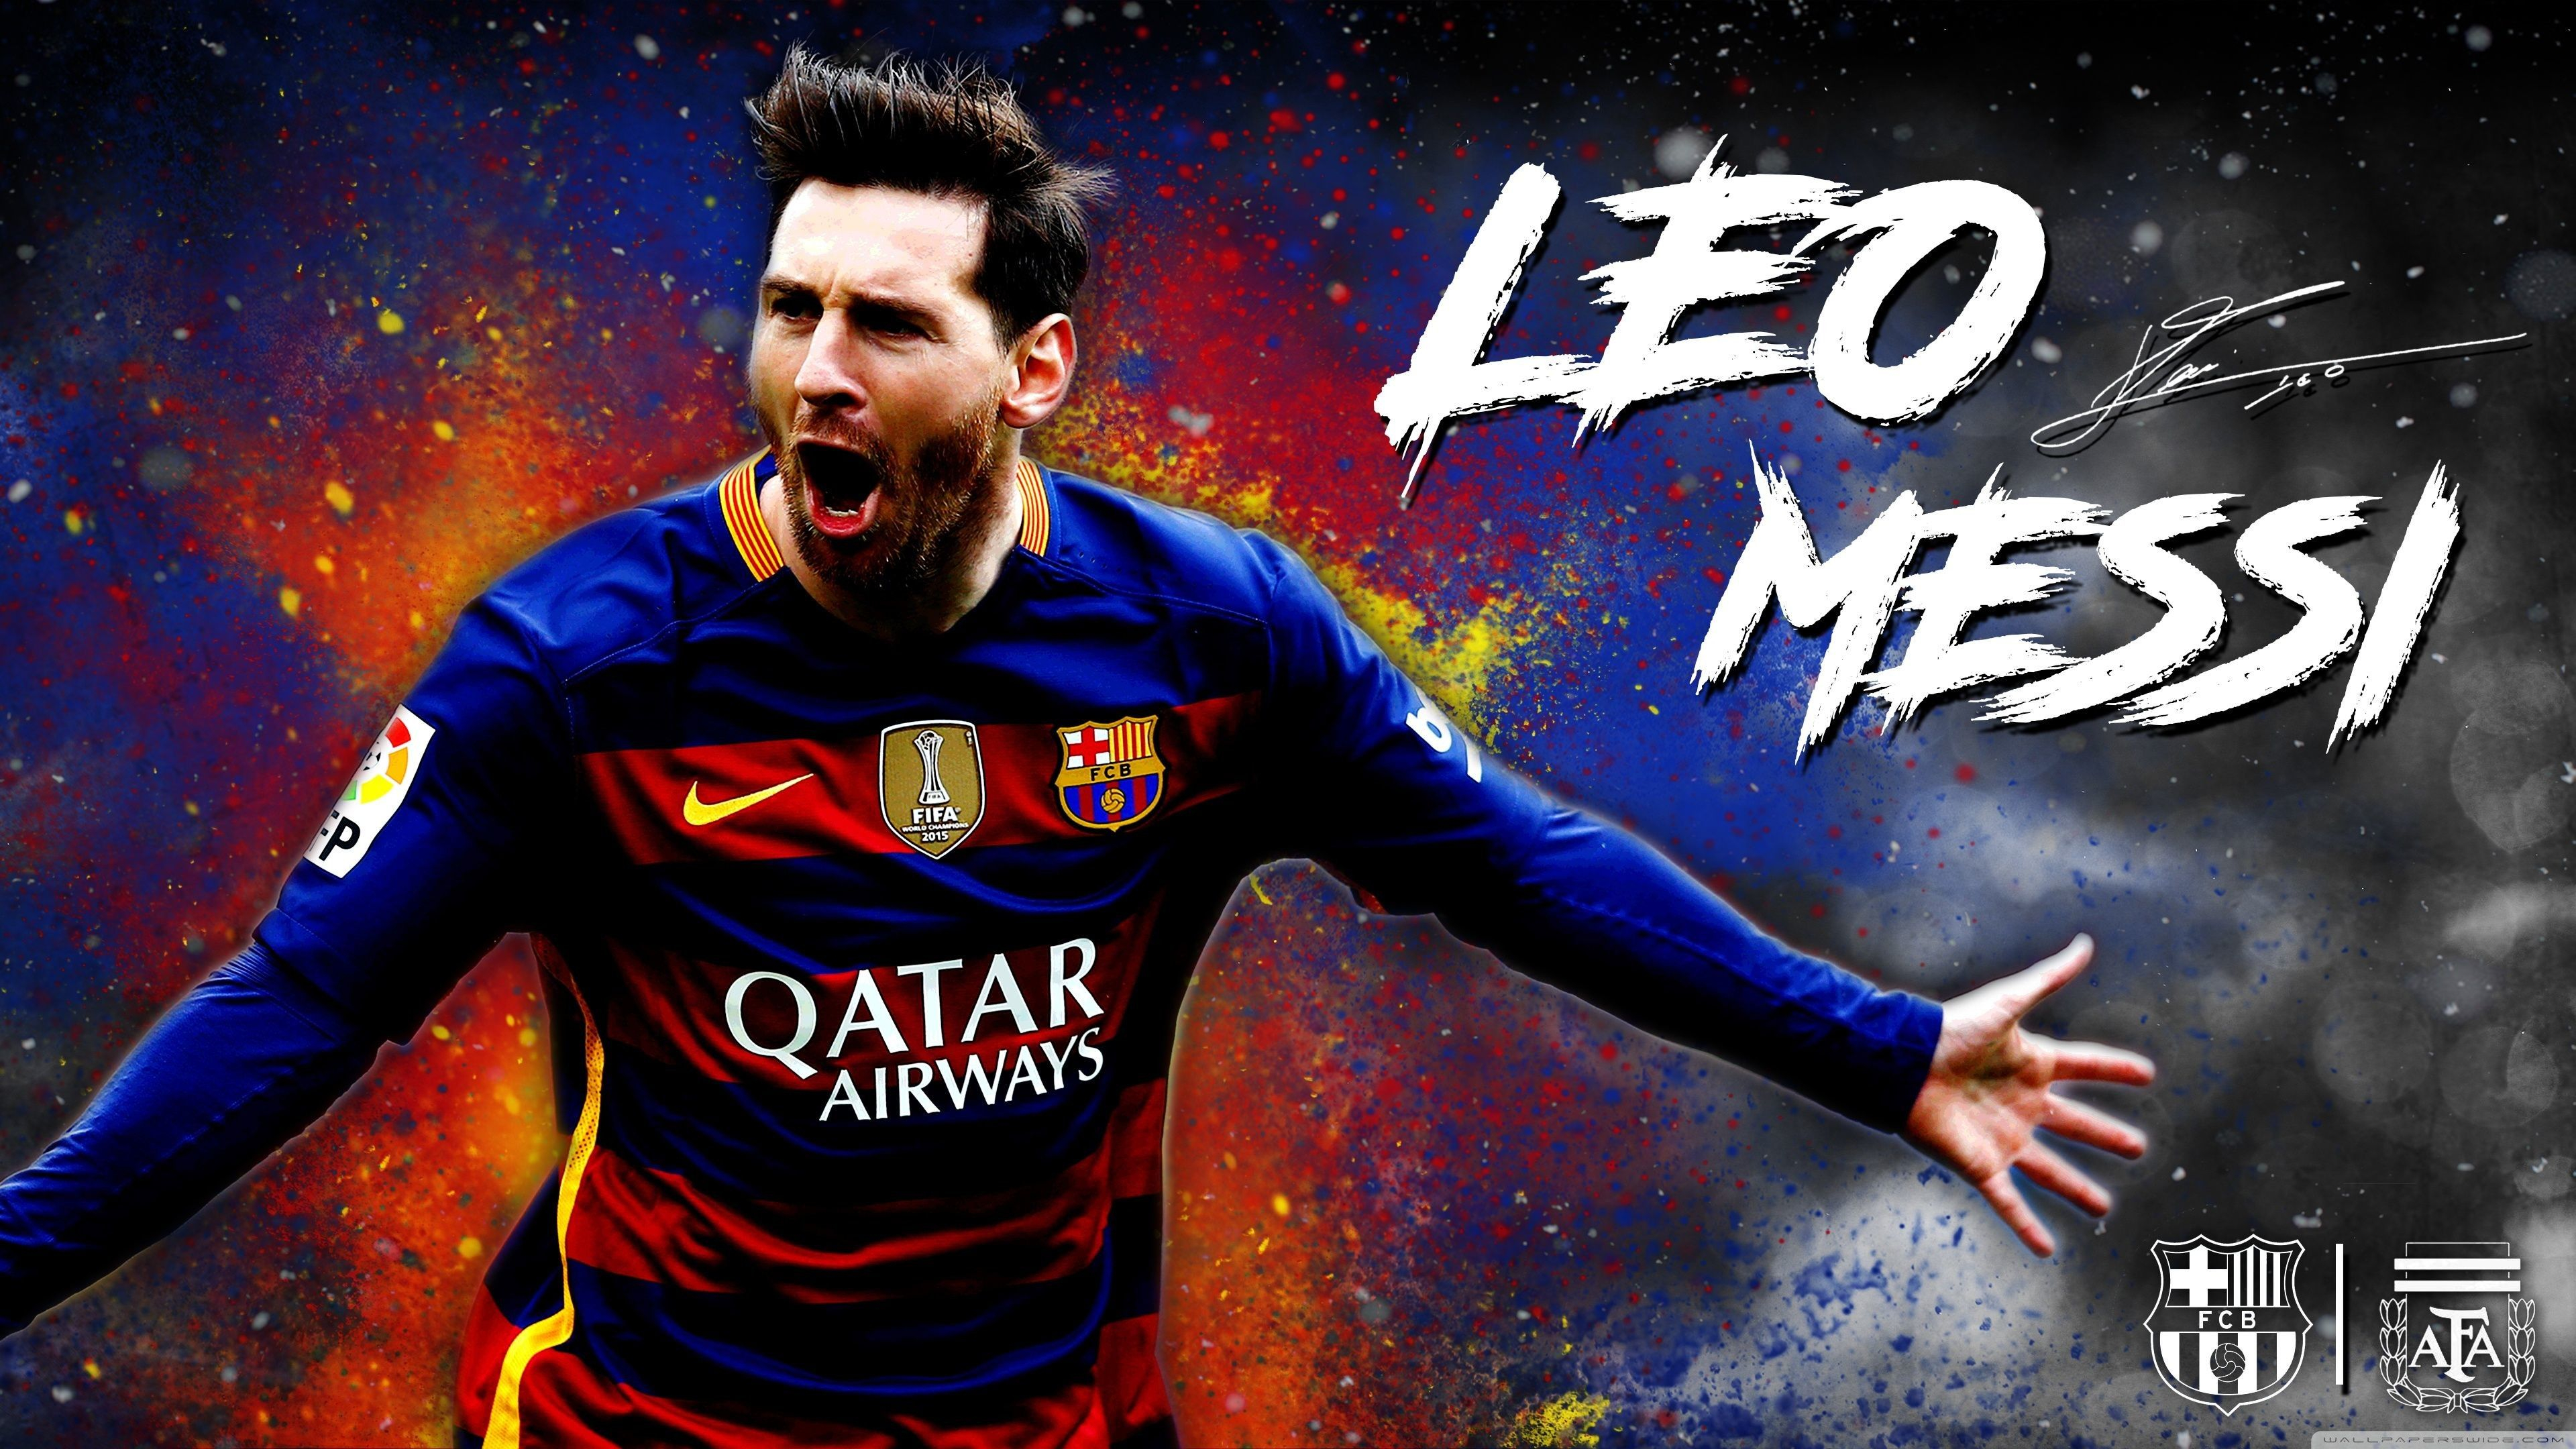 3840x2160 Messi Soccer Wallpapers Top Free Messi Soccer Backgrounds